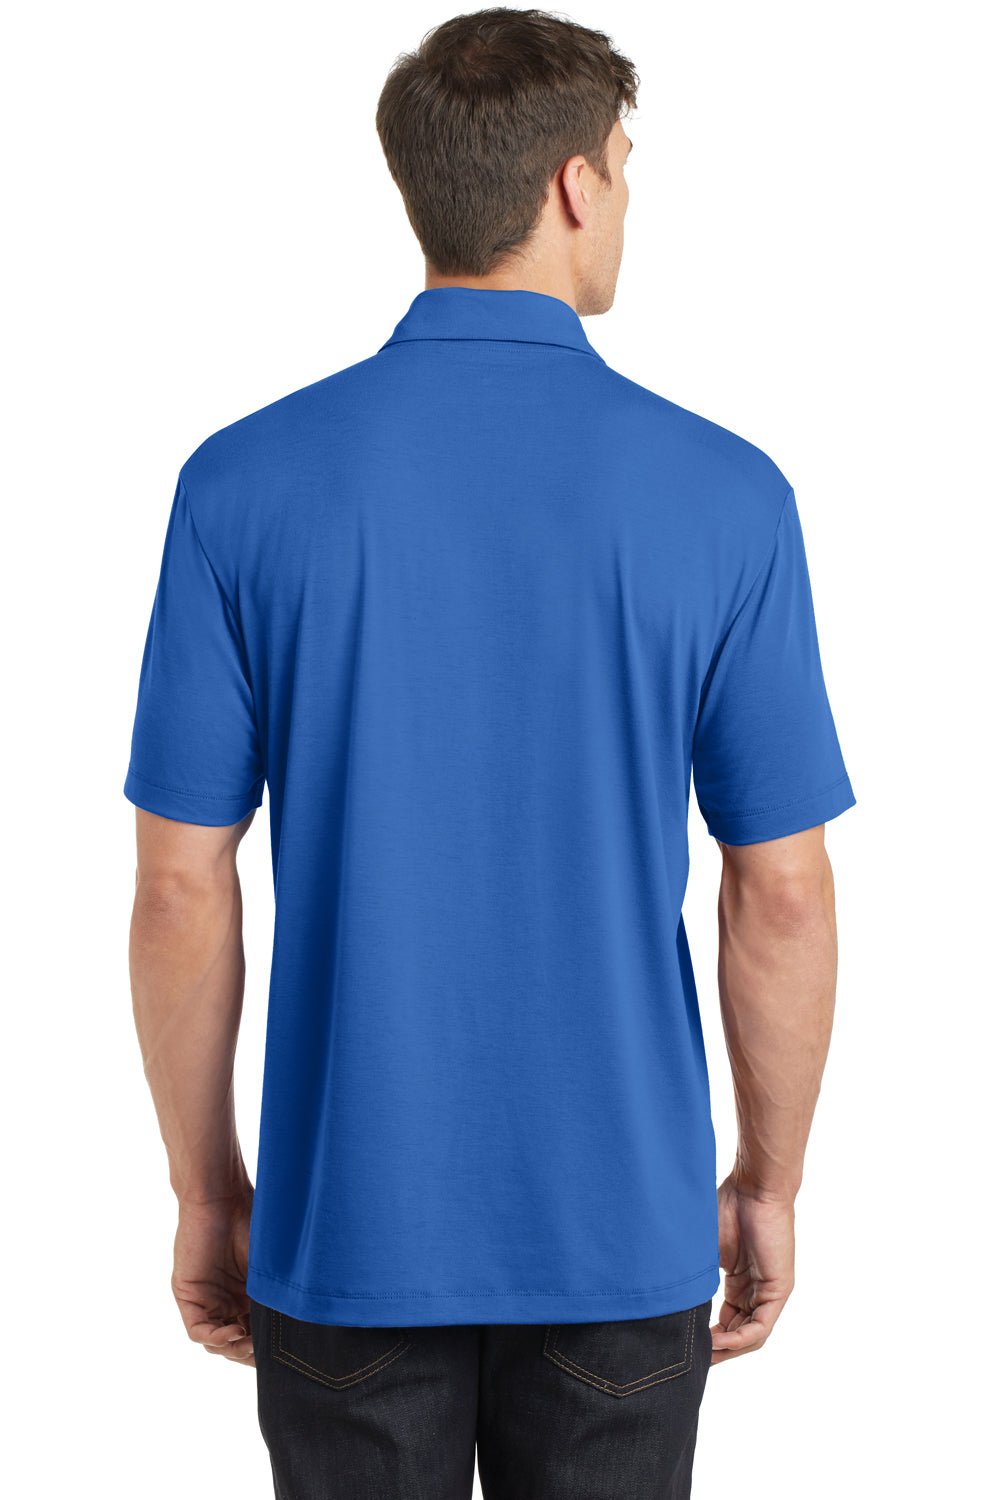 Port Authority K568 Mens Cotton Touch Performance Moisture Wicking Short Sleeve Polo Shirt Strong Blue Back